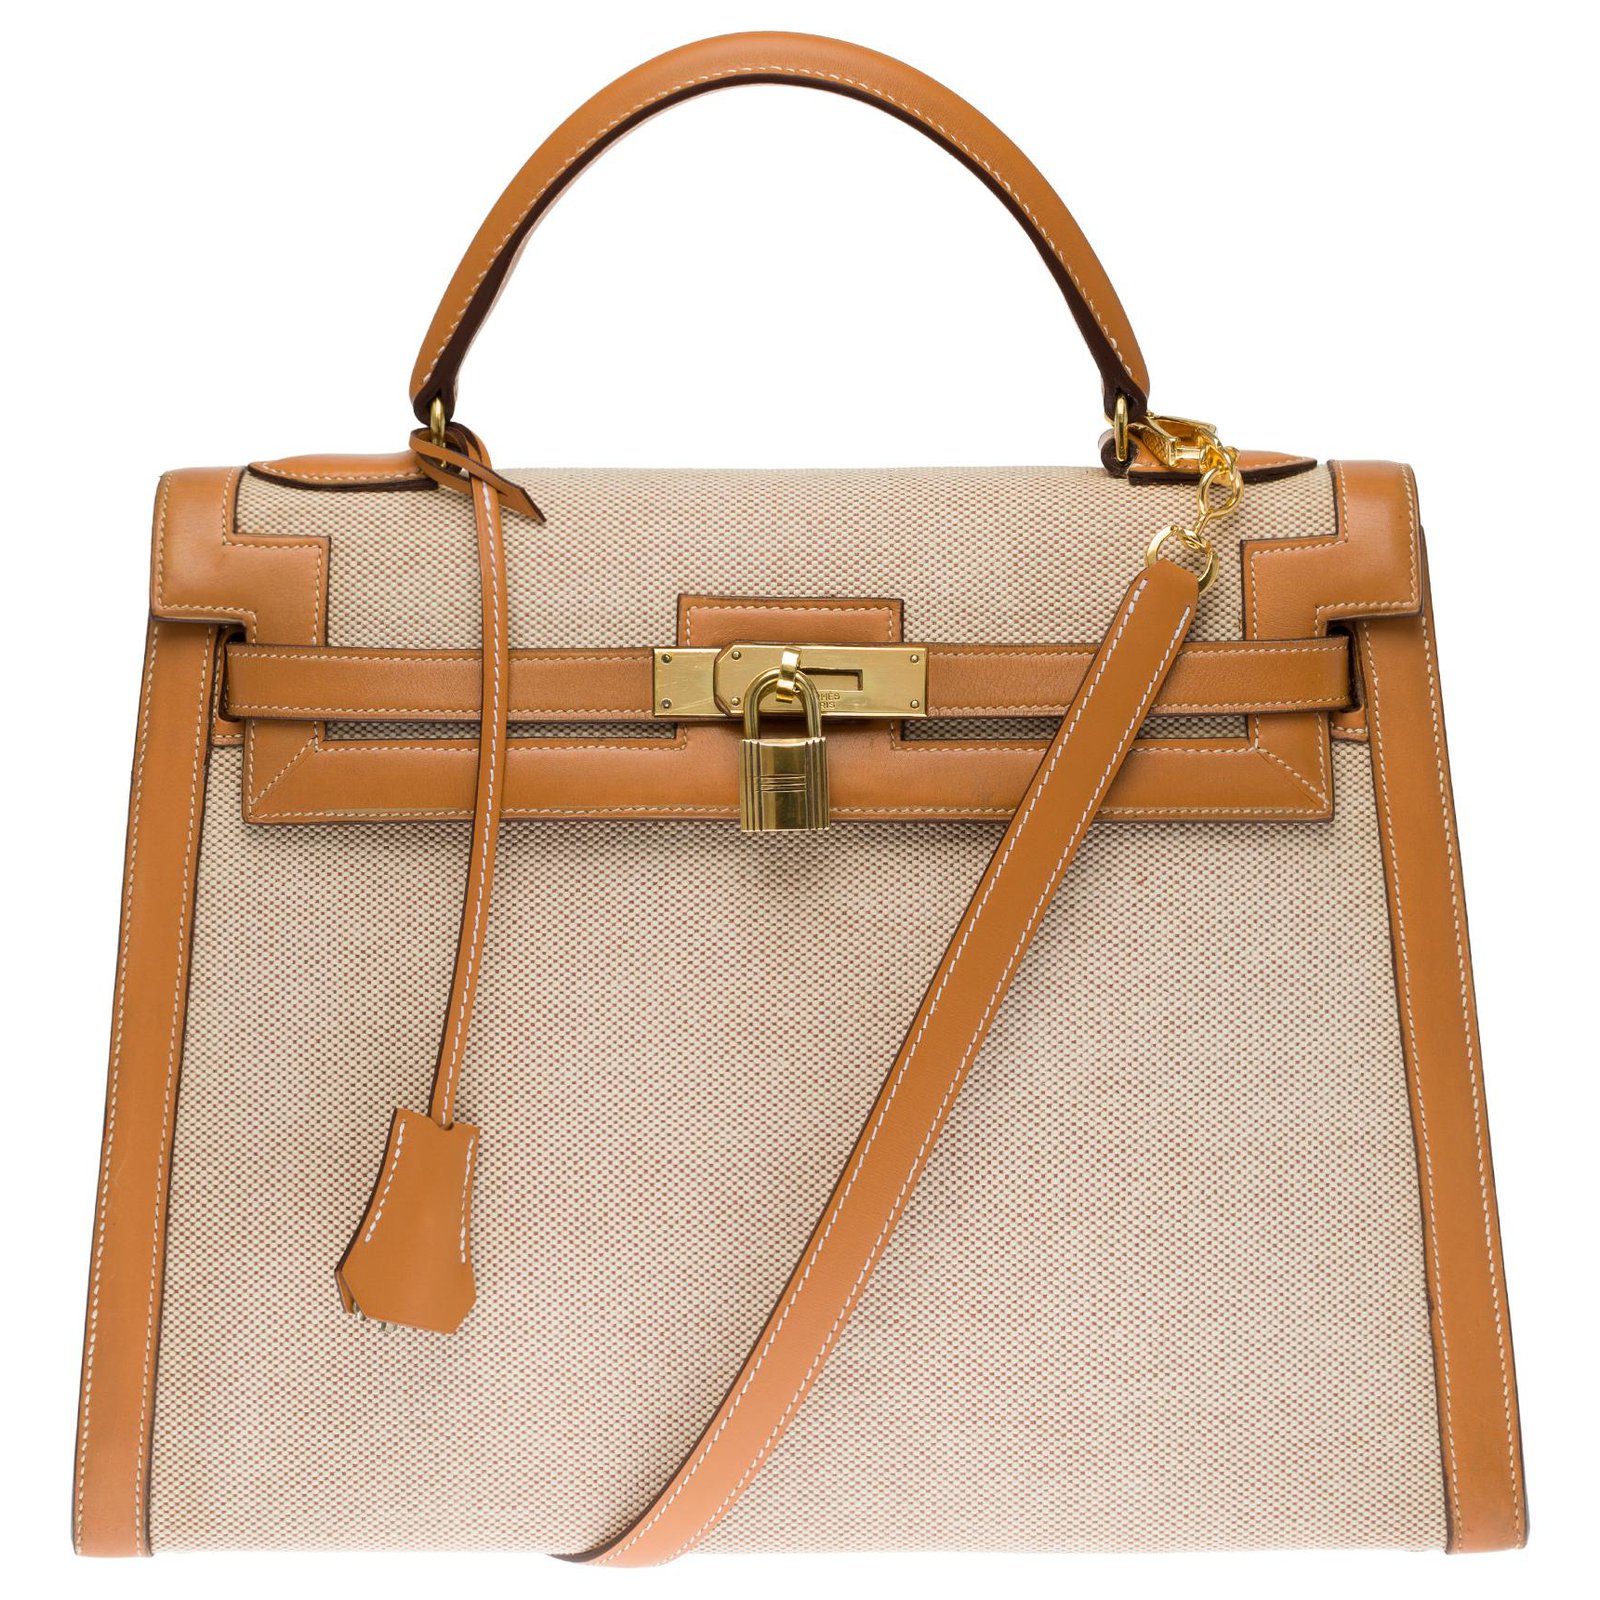 Hermes Vintage Kelly Bag 32cm in Gold Box Leather and Gold